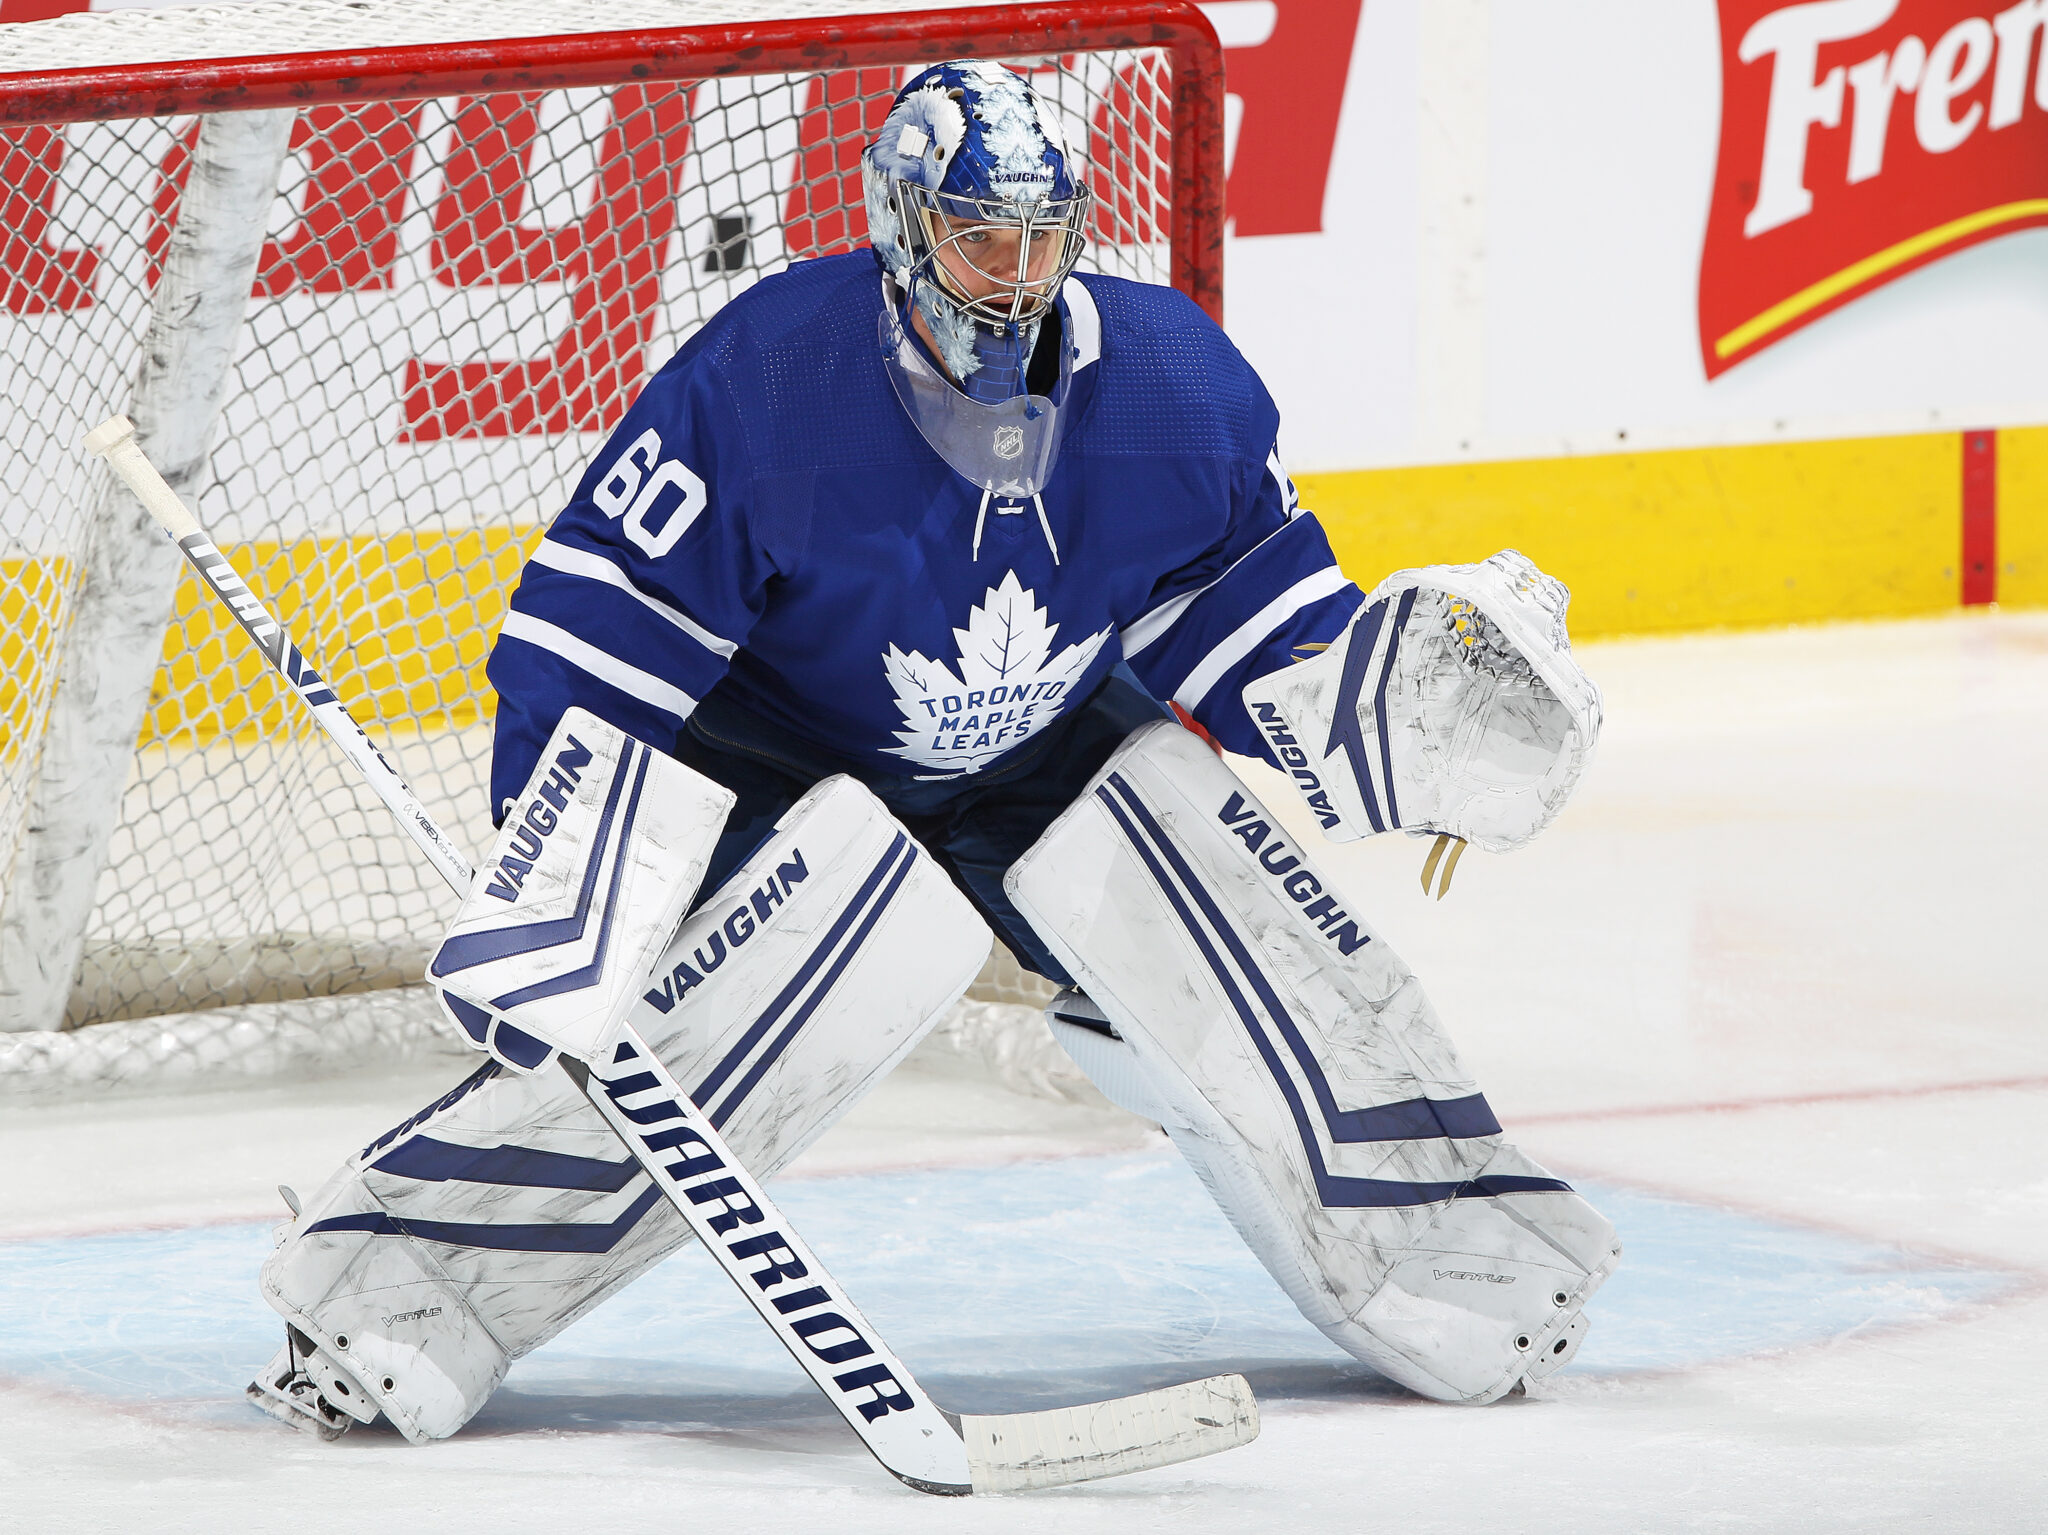 The Future is Bright in the Toronto Maple Leafs Crease